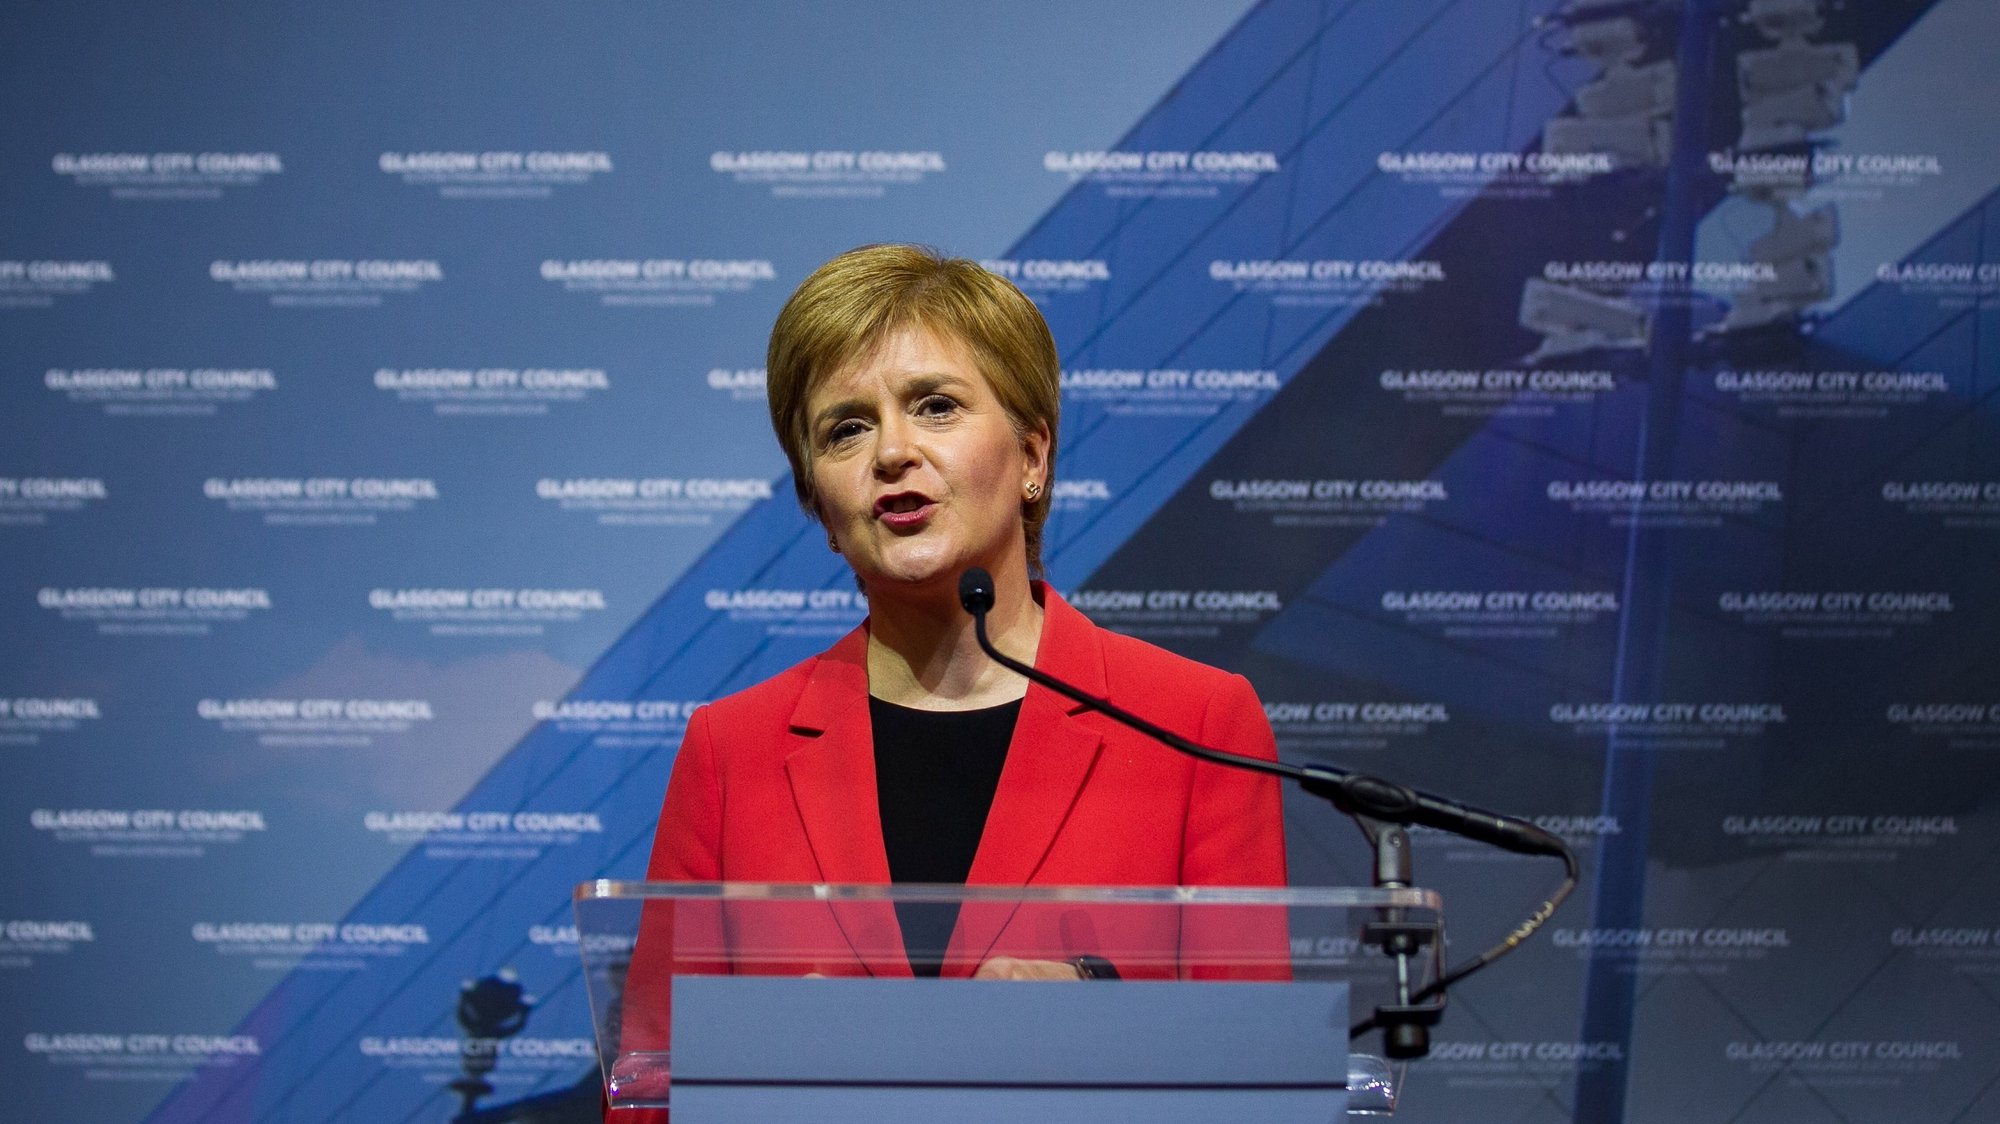 epa09183728 Scotland&#039;s First Minister and leader of the Scottish National Party (SNP), Nicola Sturgeon gives her acceptance speech after being declared the winner of the Glasgow Southside seat at Glasgow counting centre in the Emirates Arena in Glasgow, Britain, 07 May 2021. People in Scotland headed to the polls on 06 May to elect 129 members of the Scottish Parliament. The vote count began on 07 May and the final results are expected to be announced on 08 May.  EPA/ROBERT PERRY